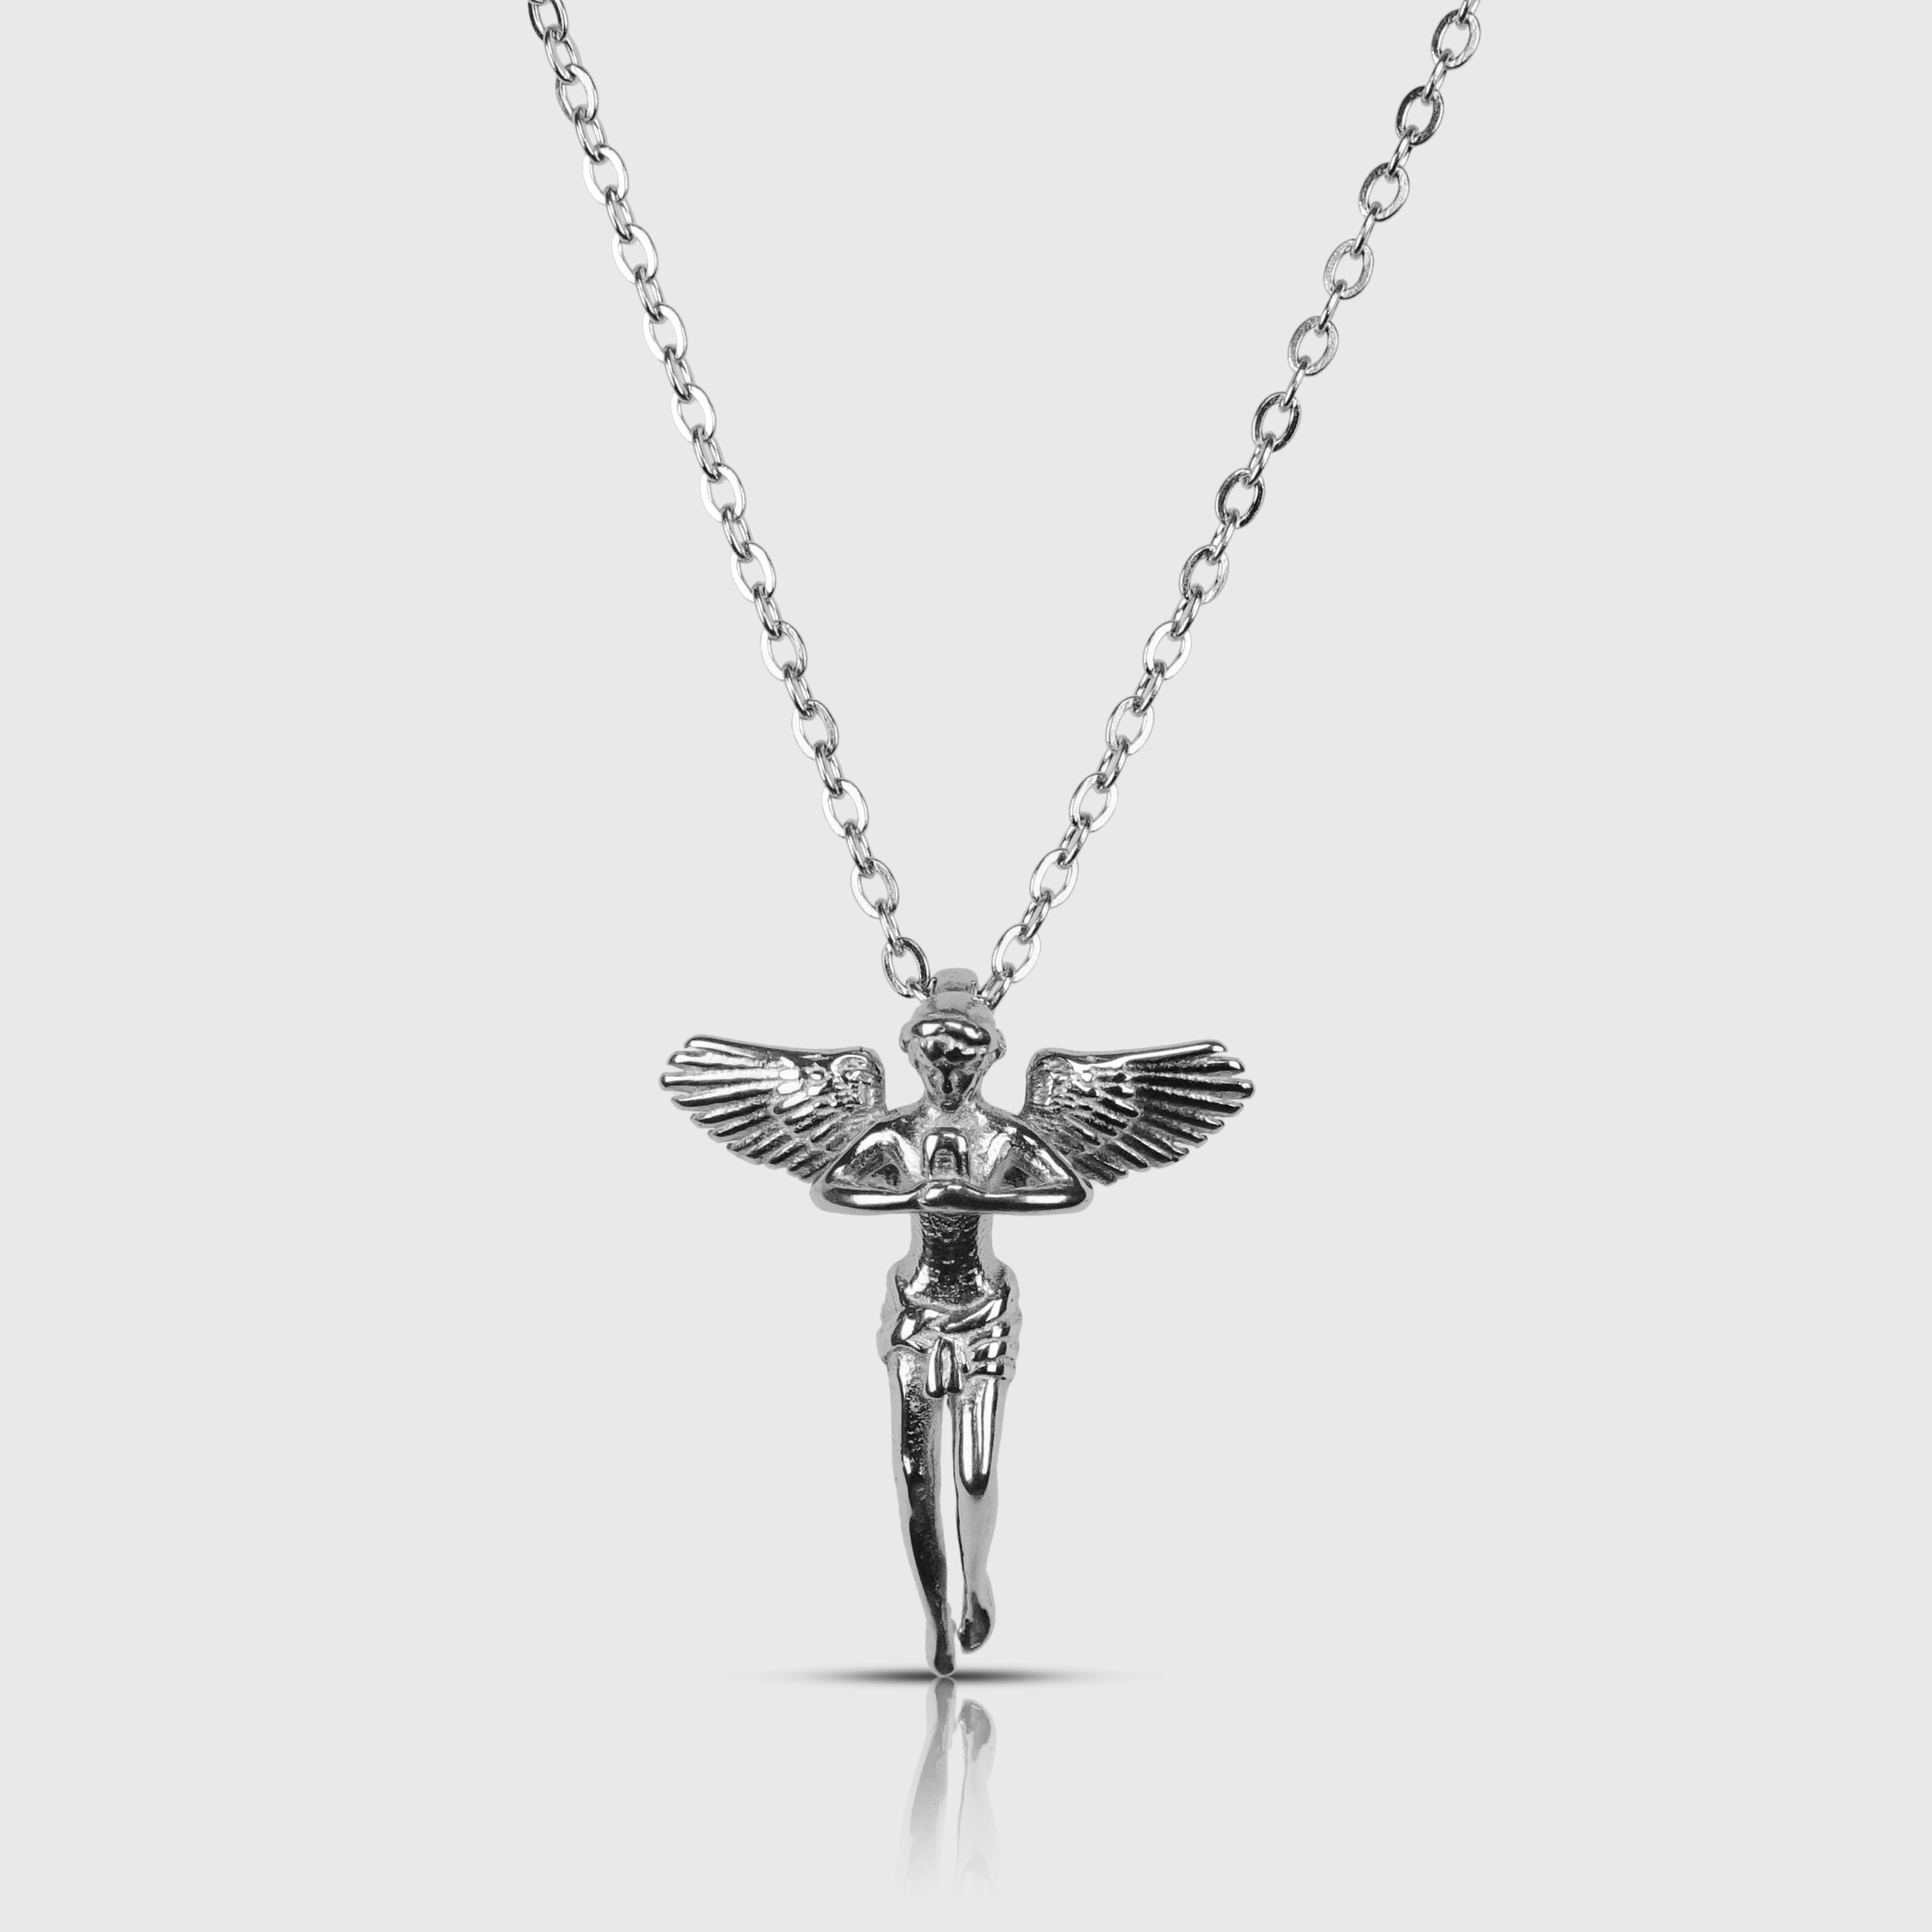 FLYING ANGEL NECKLACE - SILVER TONE